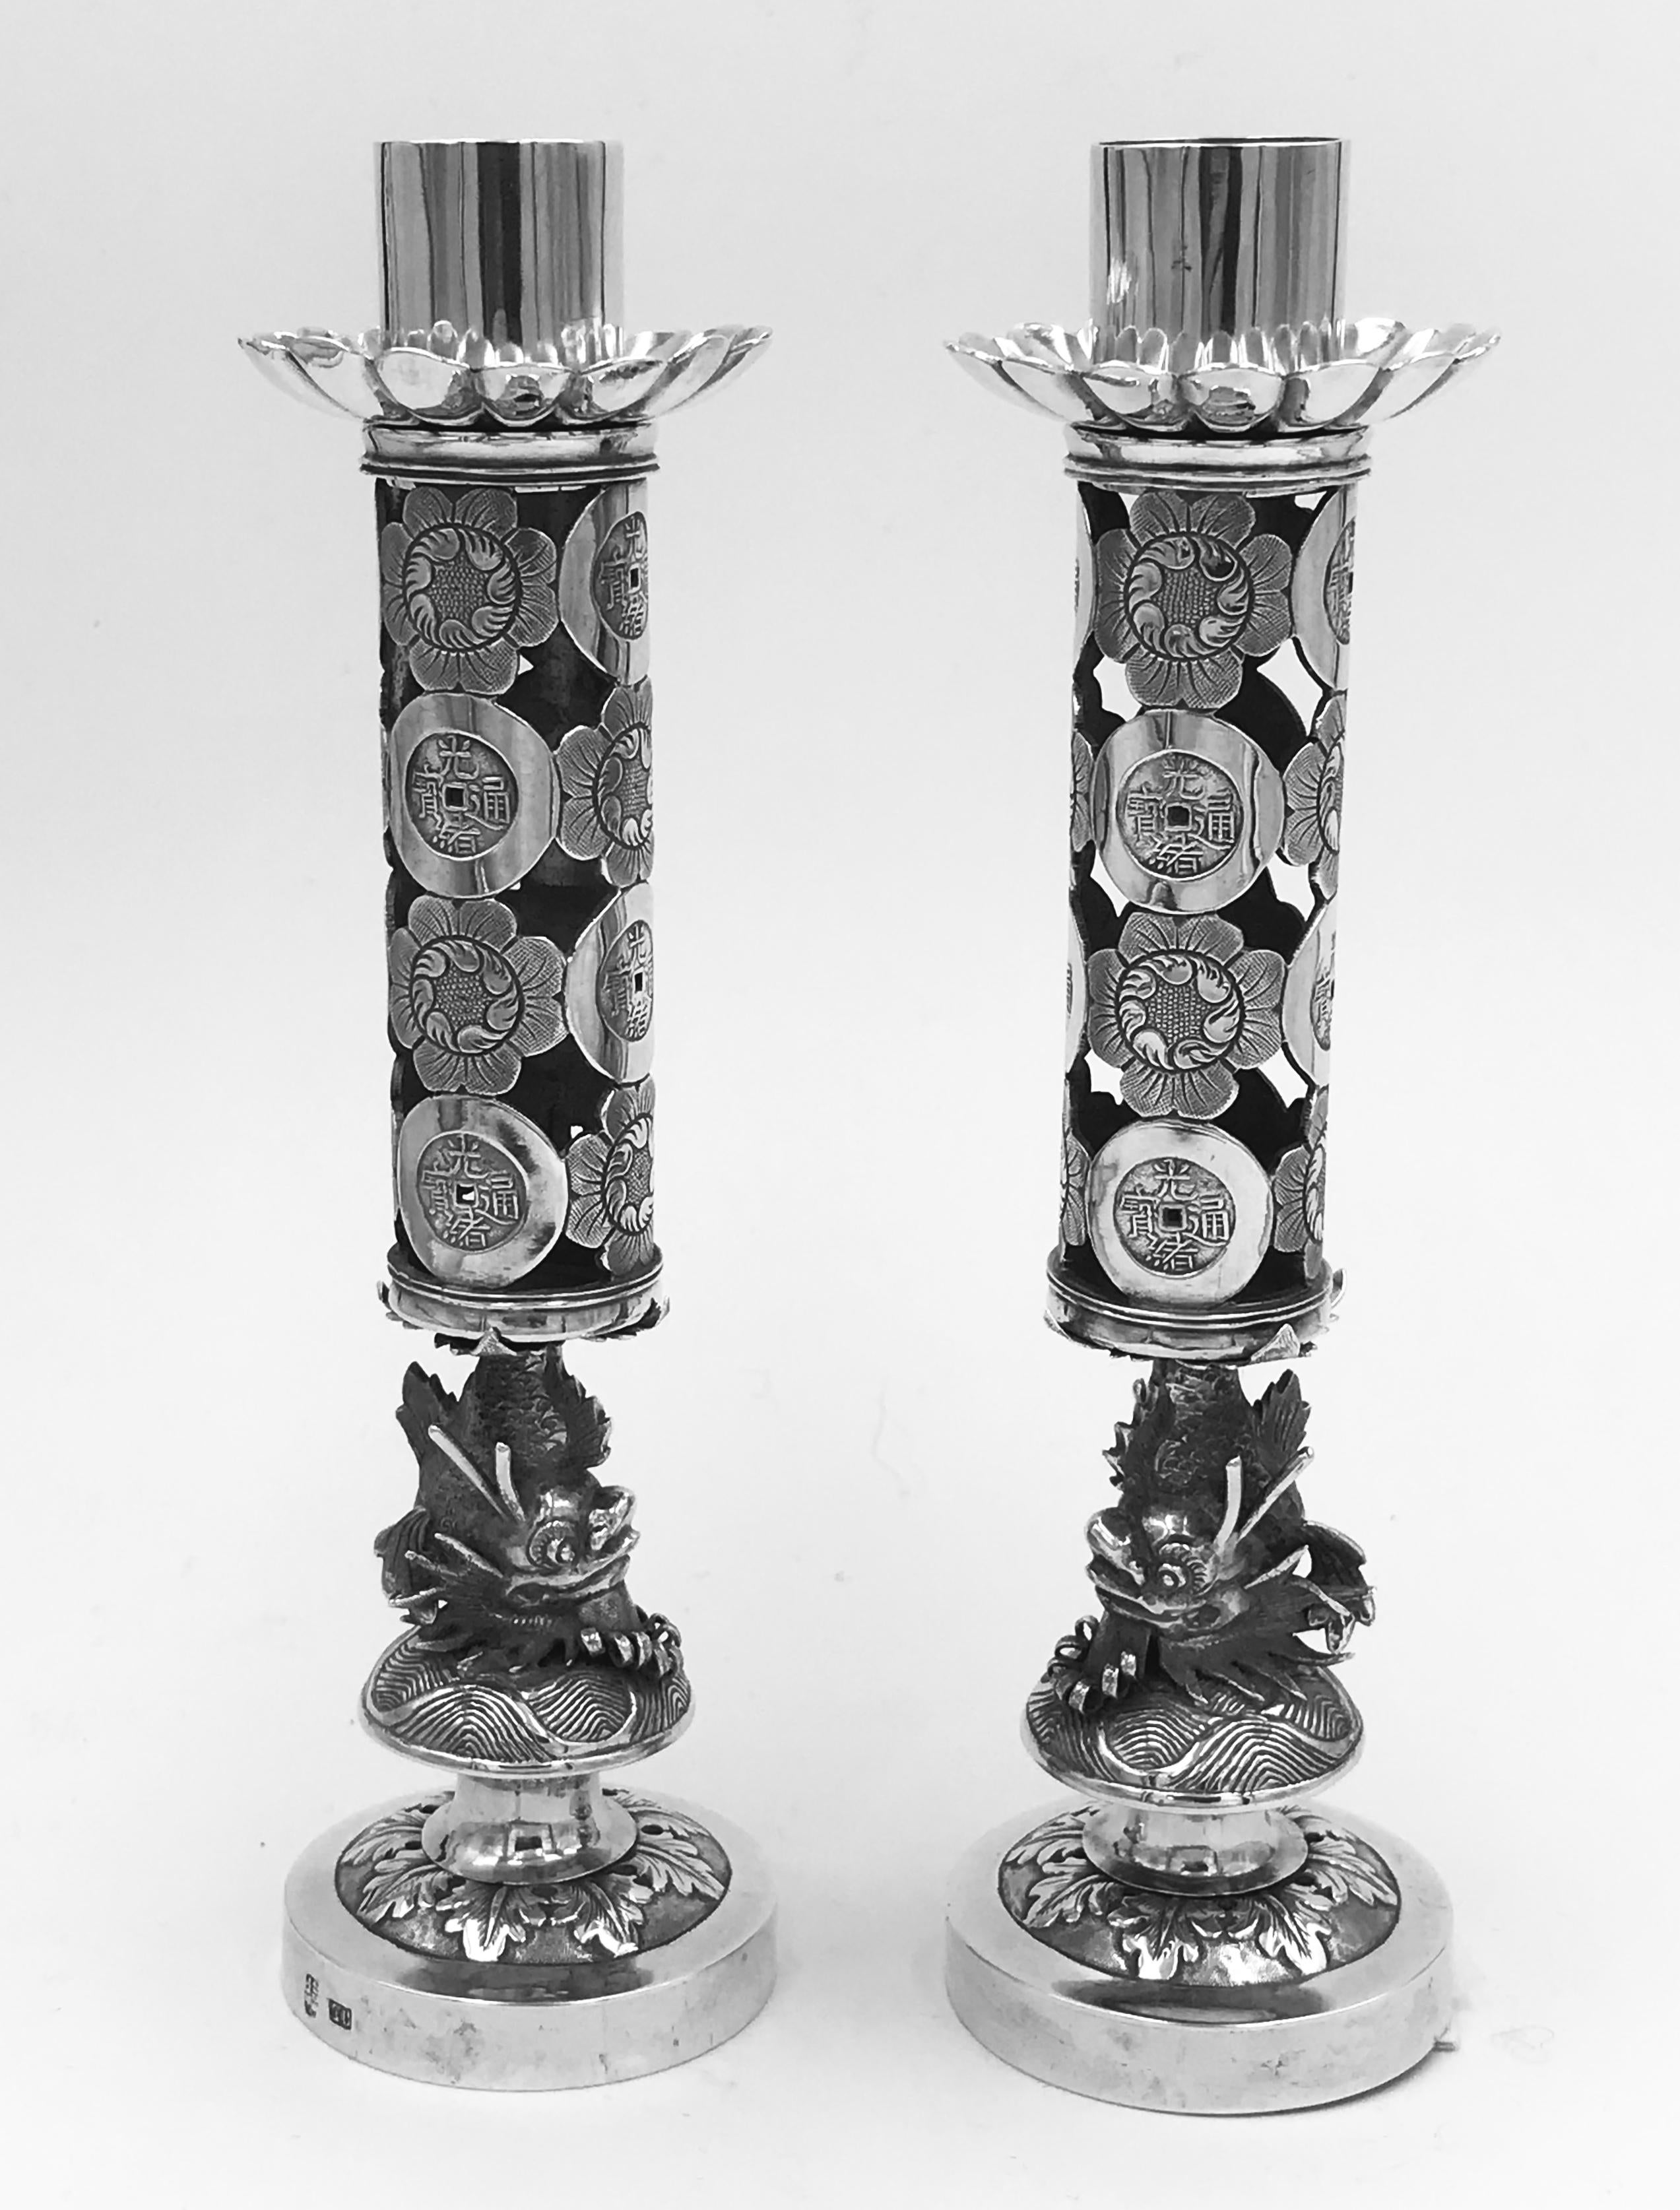 A pair of Chinese Export silver candlesticks, marked with TC, for Tuck Chang, 德祥 公记(DeXiangGongJi), a Shanghai retailer from 1901-1934, and with the maker's mark of 培记 (PeiJi).
230gms
Size: Height 158mm
Diameter of base 43mm.